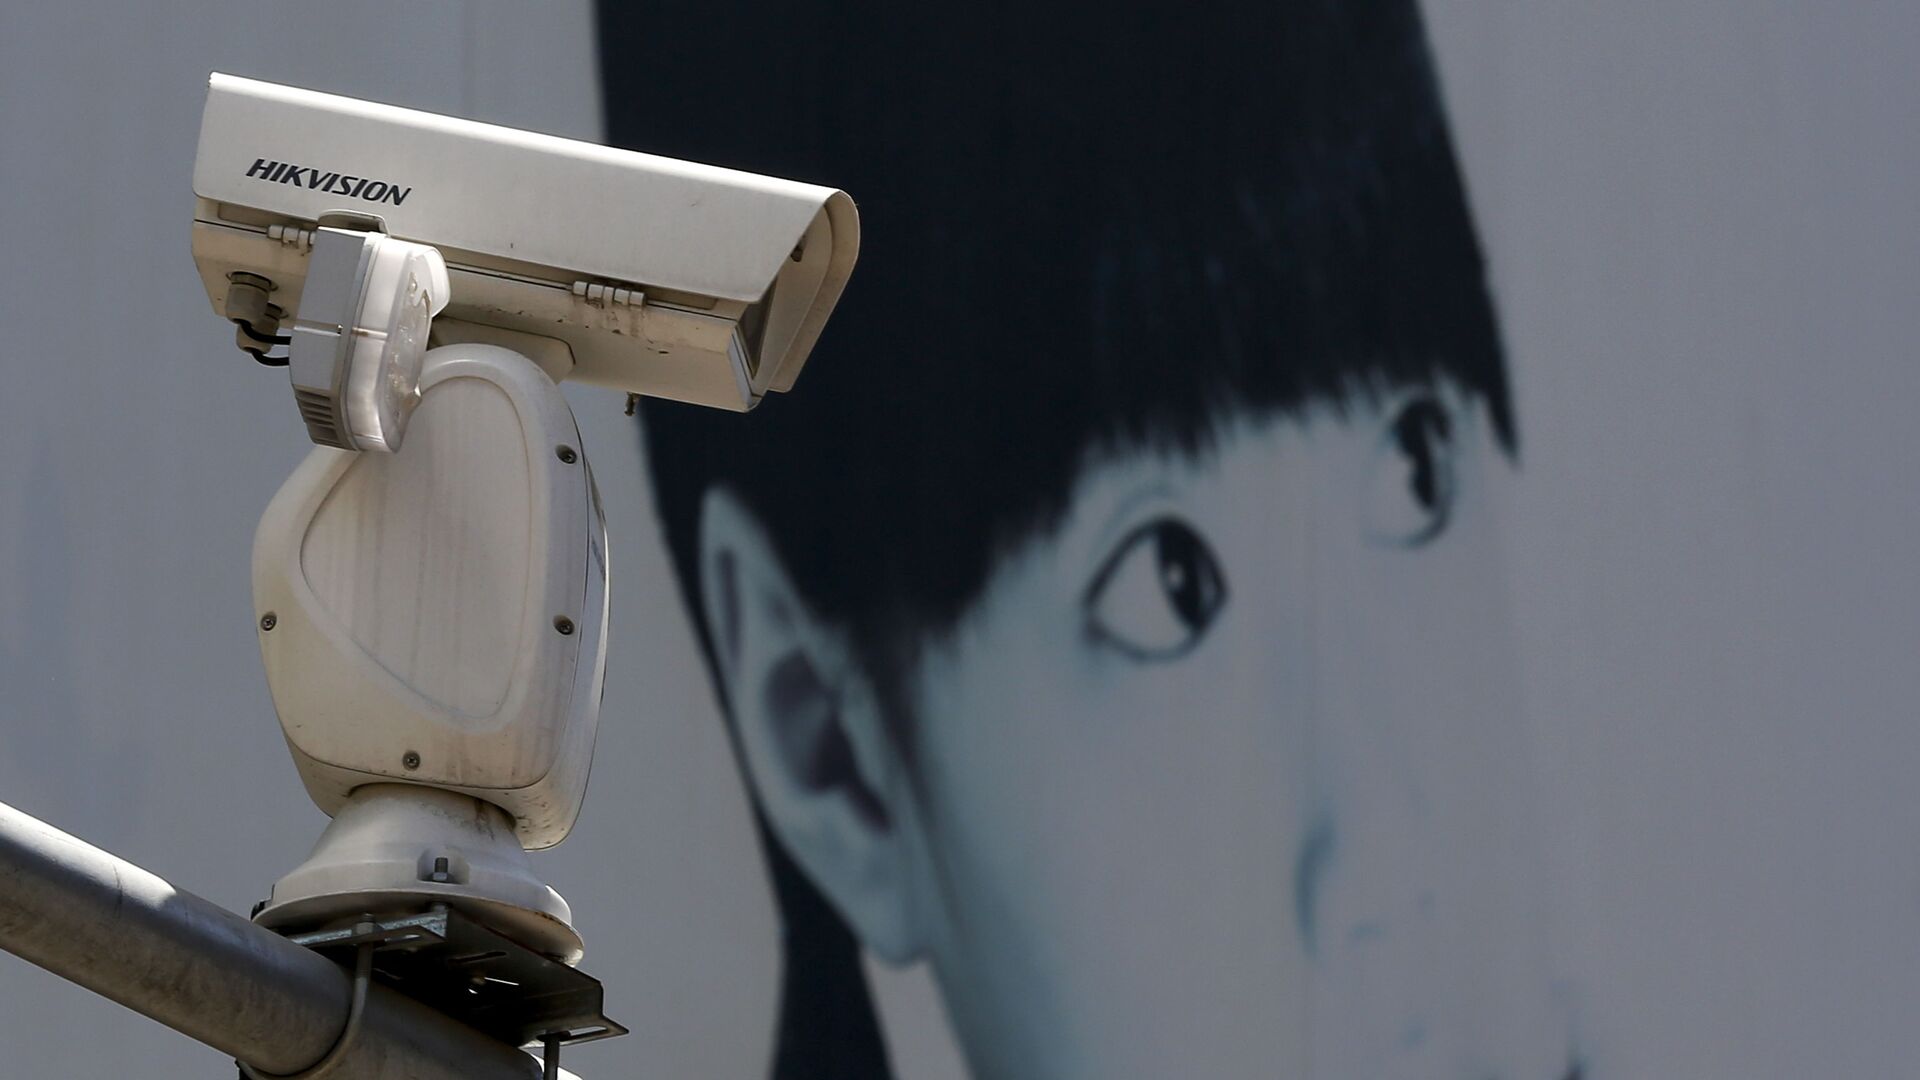 A video surveillance camera made by China's Hikvision is mounted on top of a street near a advertisement poster in Beijing. - Sputnik International, 1920, 13.03.2023